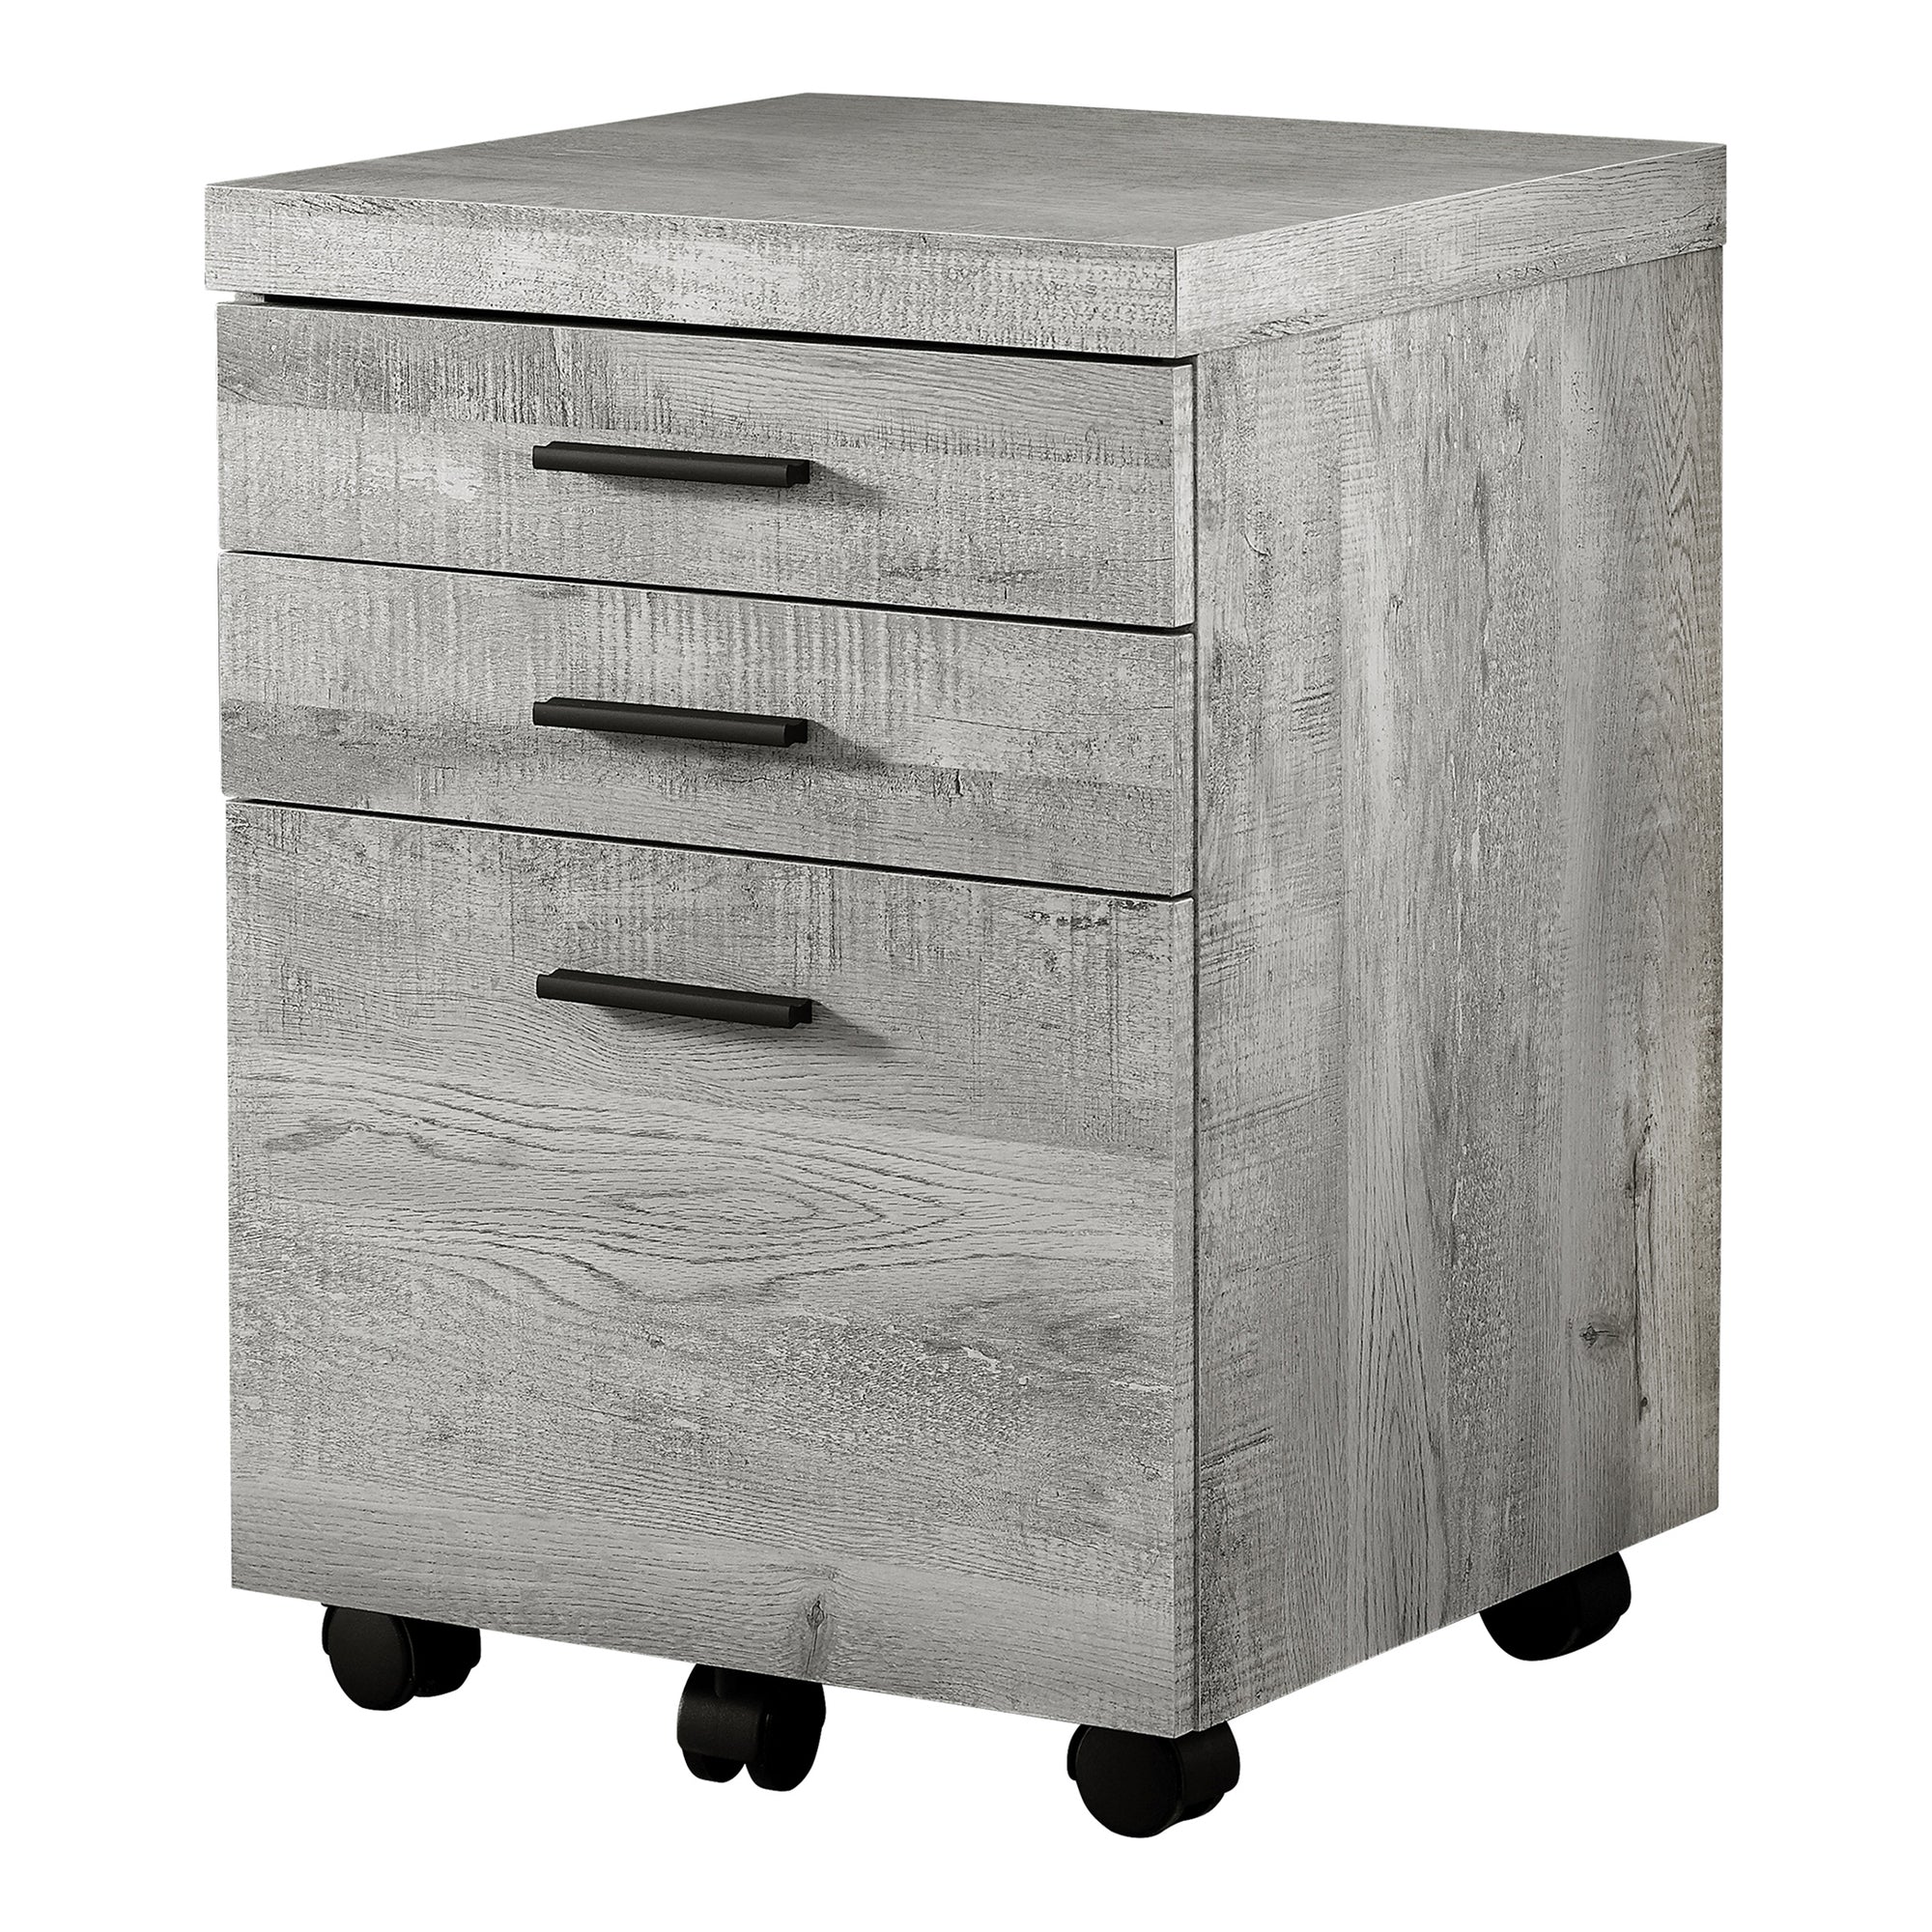 MN-677401    File Cabinet, Rolling Mobile, Storage, Printer Stand, Wood File Cabinet, Office, Mdf, Grey Reclaimed Wood Look, Black, Contemporary, Modern